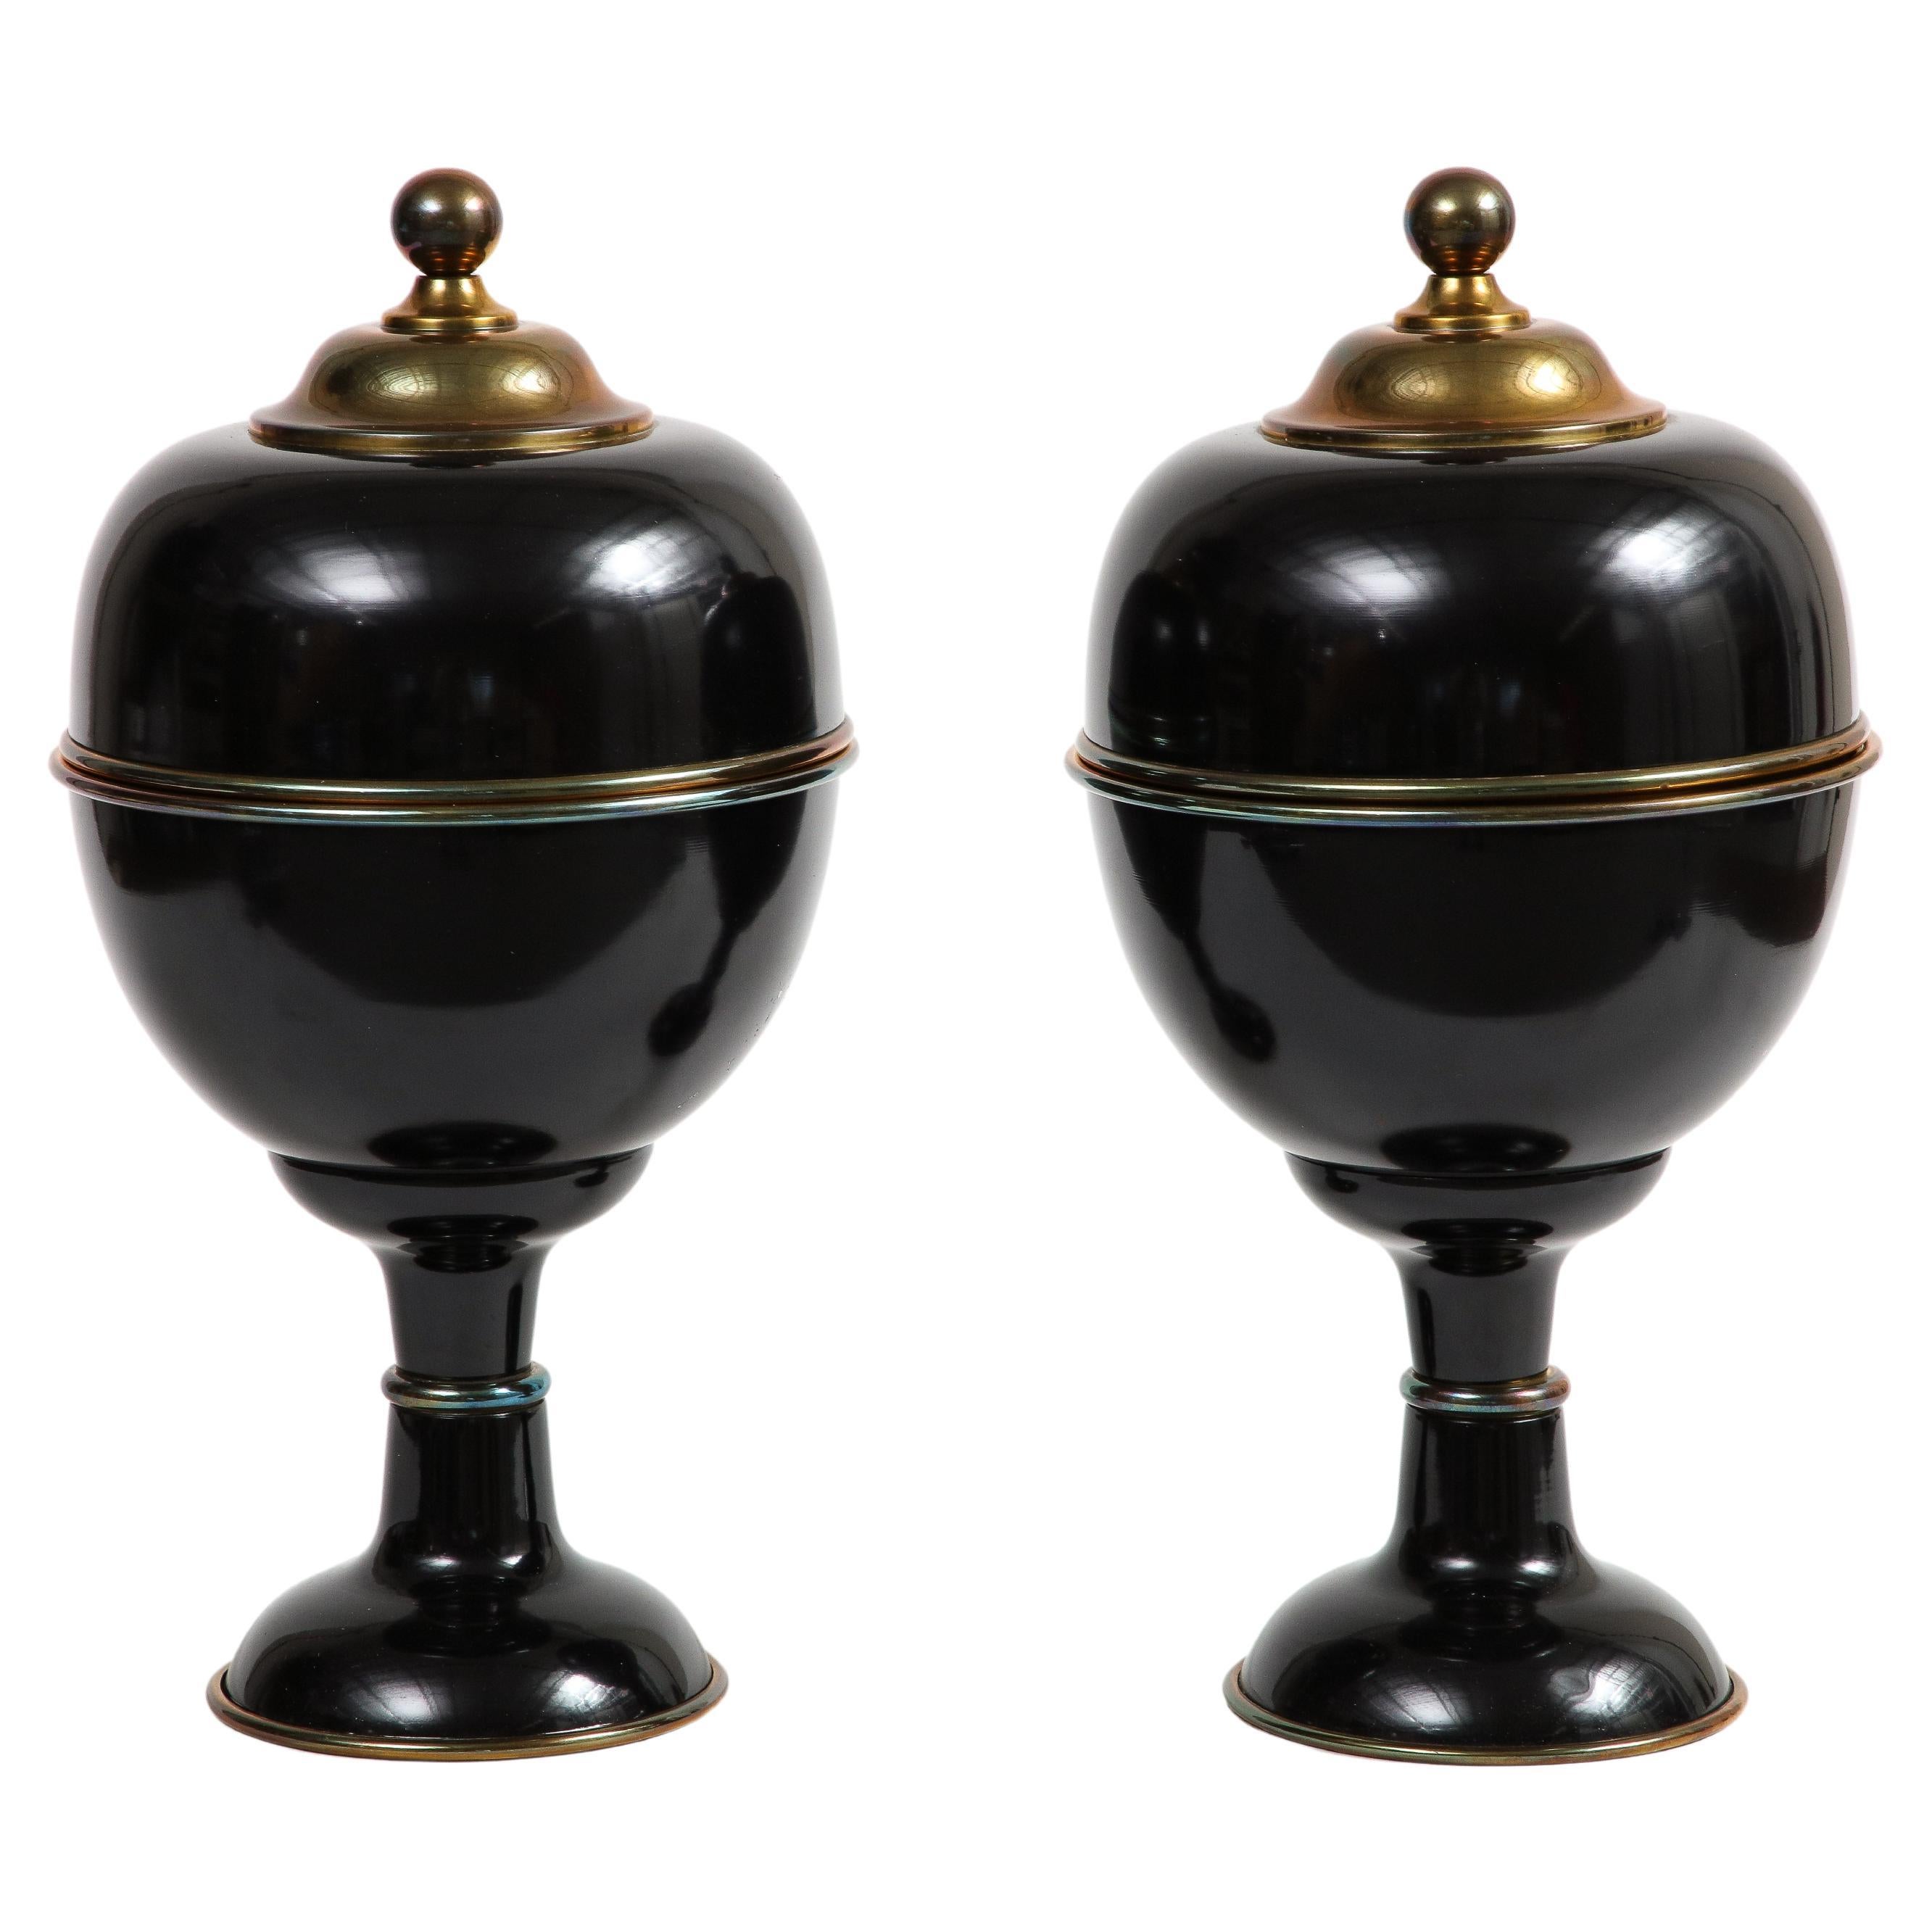 Pair of Large Decorative Black Enamel Urns with Brass Detail